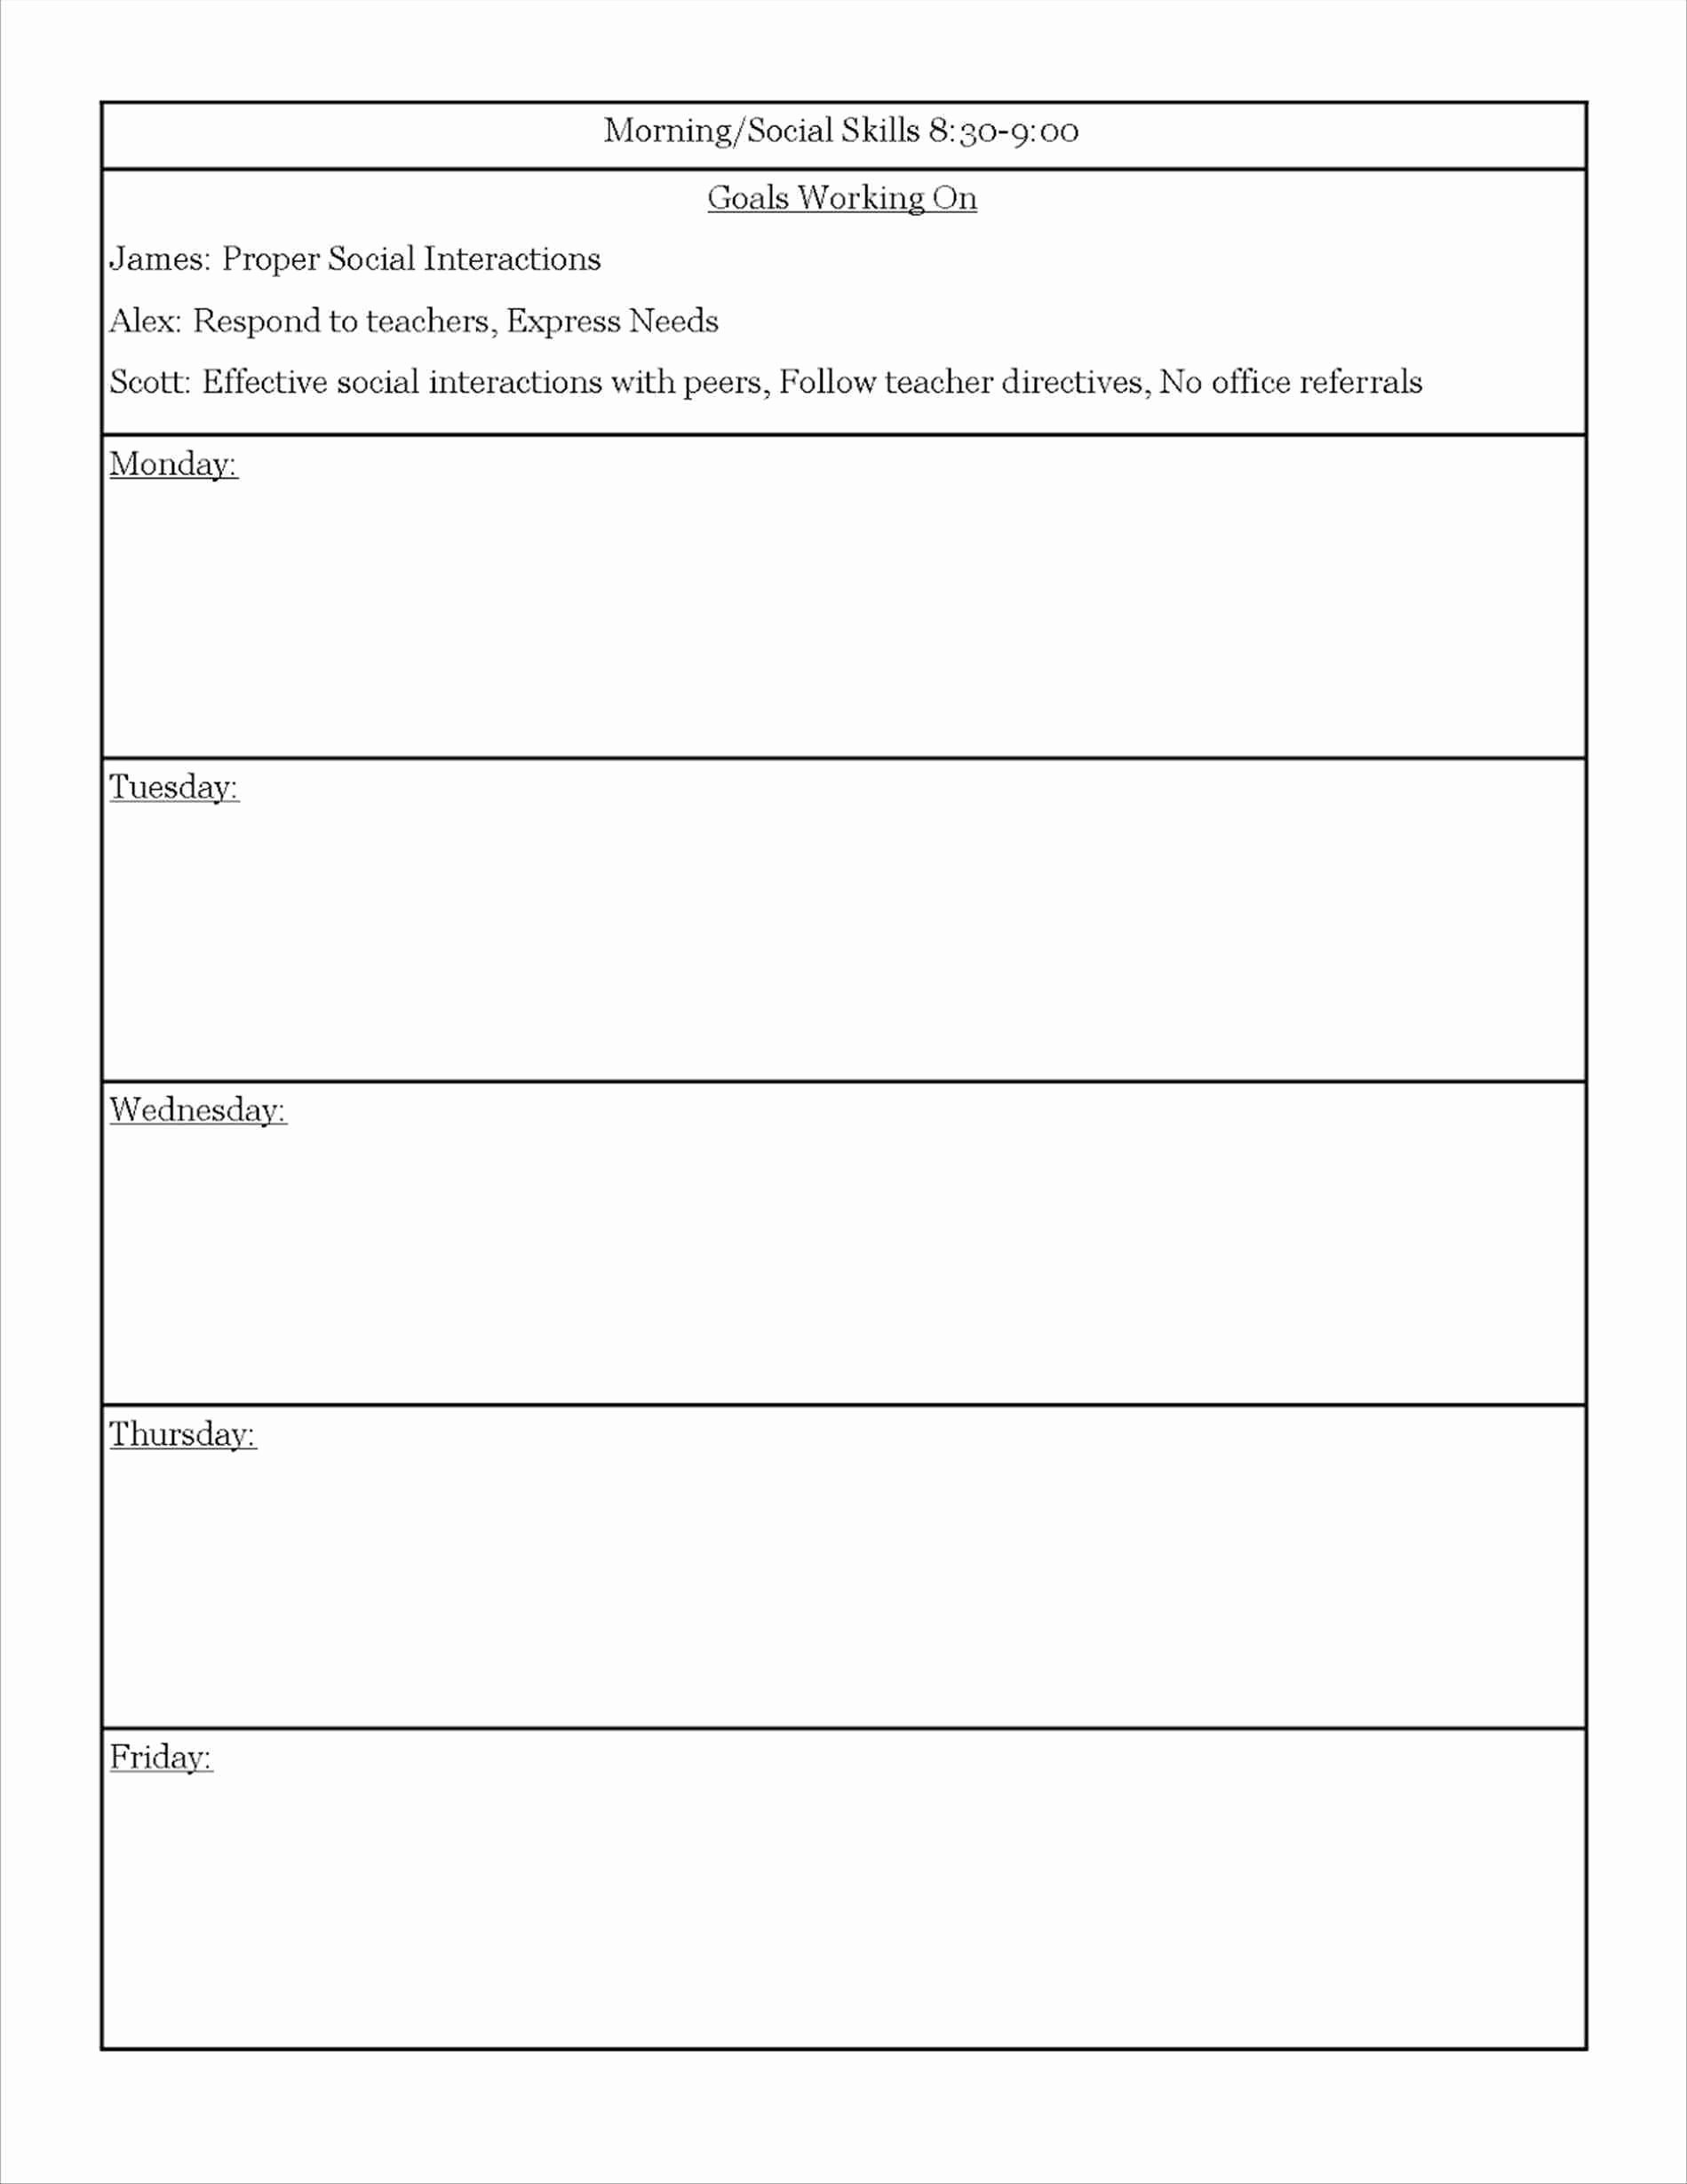 Foreign Language Lesson Plan Template Luxury Speech Lesson Plan Template – foreign Language Lesson Plan